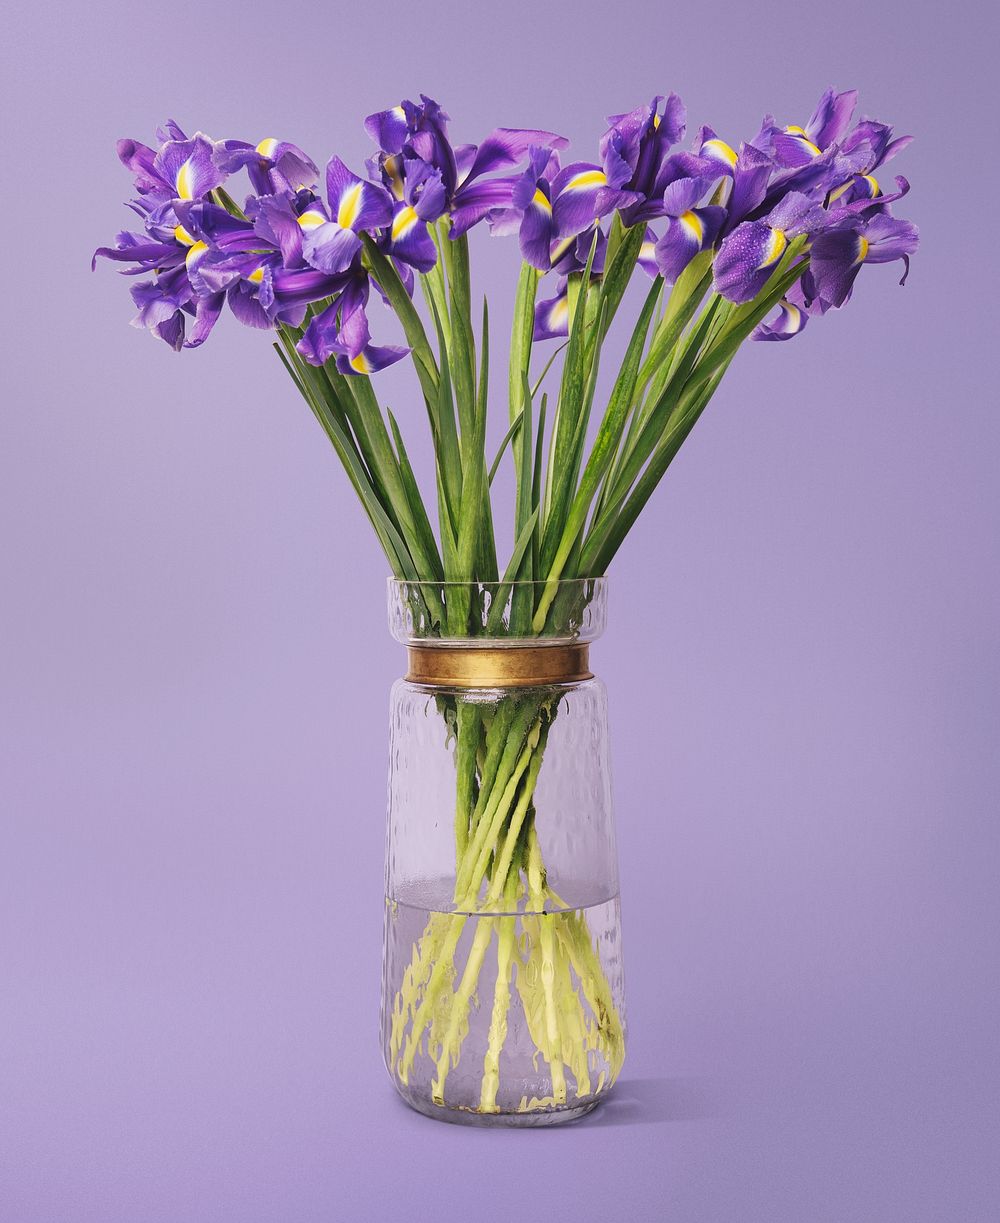 Purple iris in glass vase, isolated object design psd